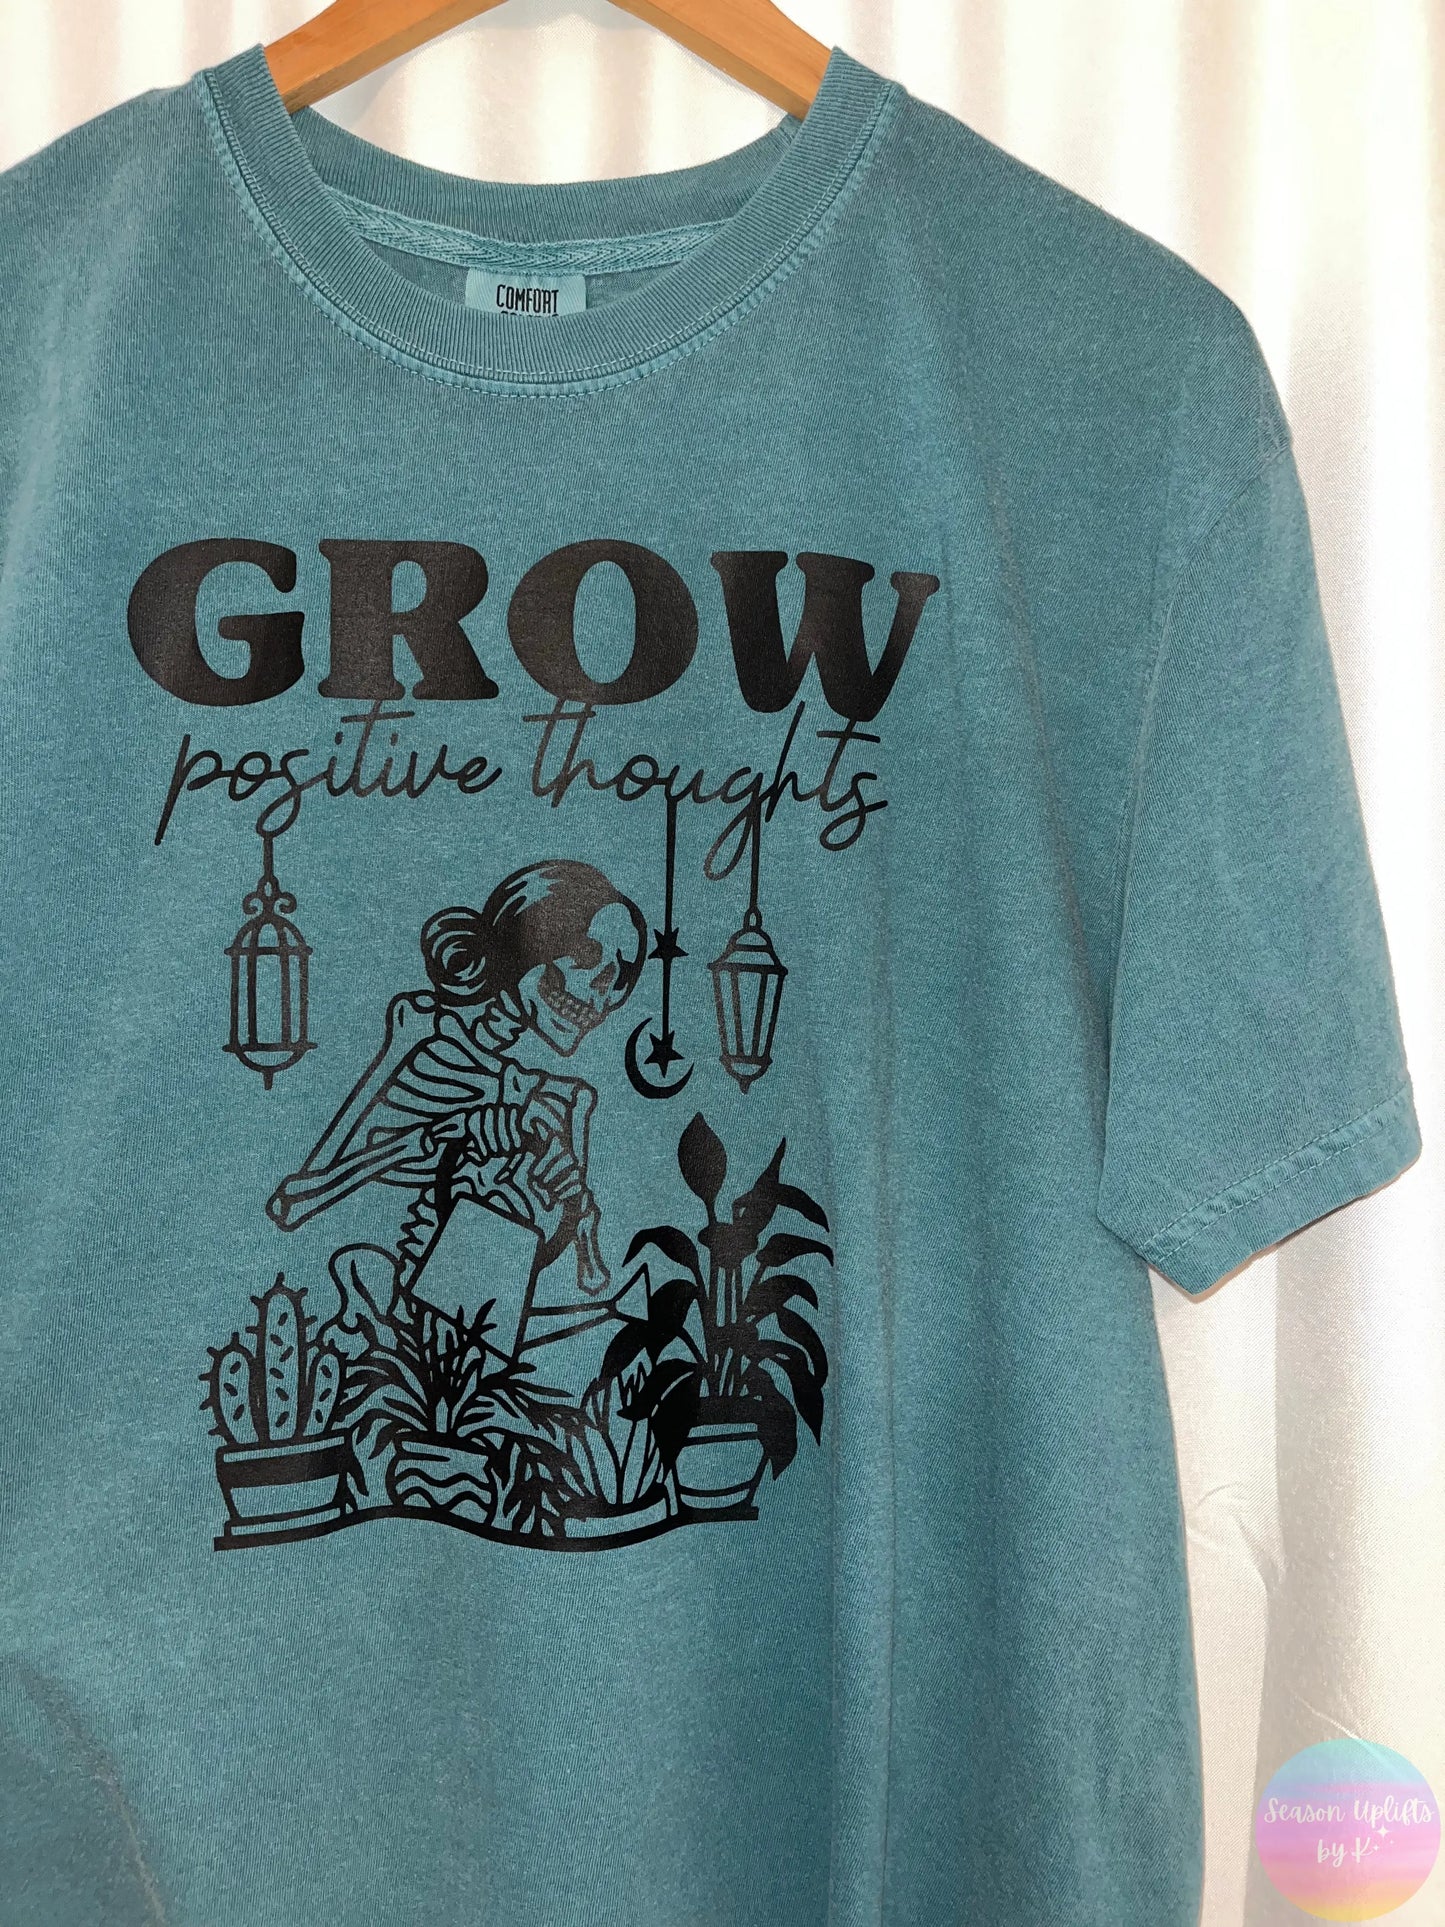 Grow Positive Thoughts Season Uplifts by K